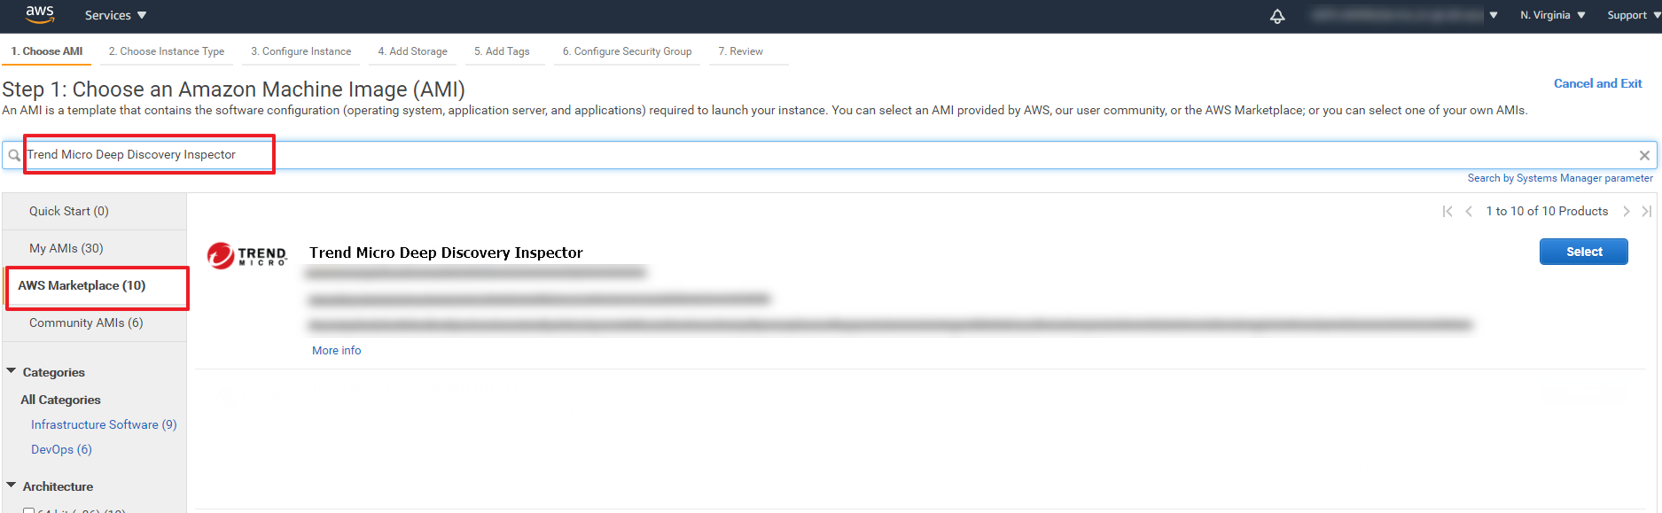 aws_marketplace=GUID-48CEC453-F116-421E-9FF3-BD7FE8B08D5E=1=en-us=Low.png